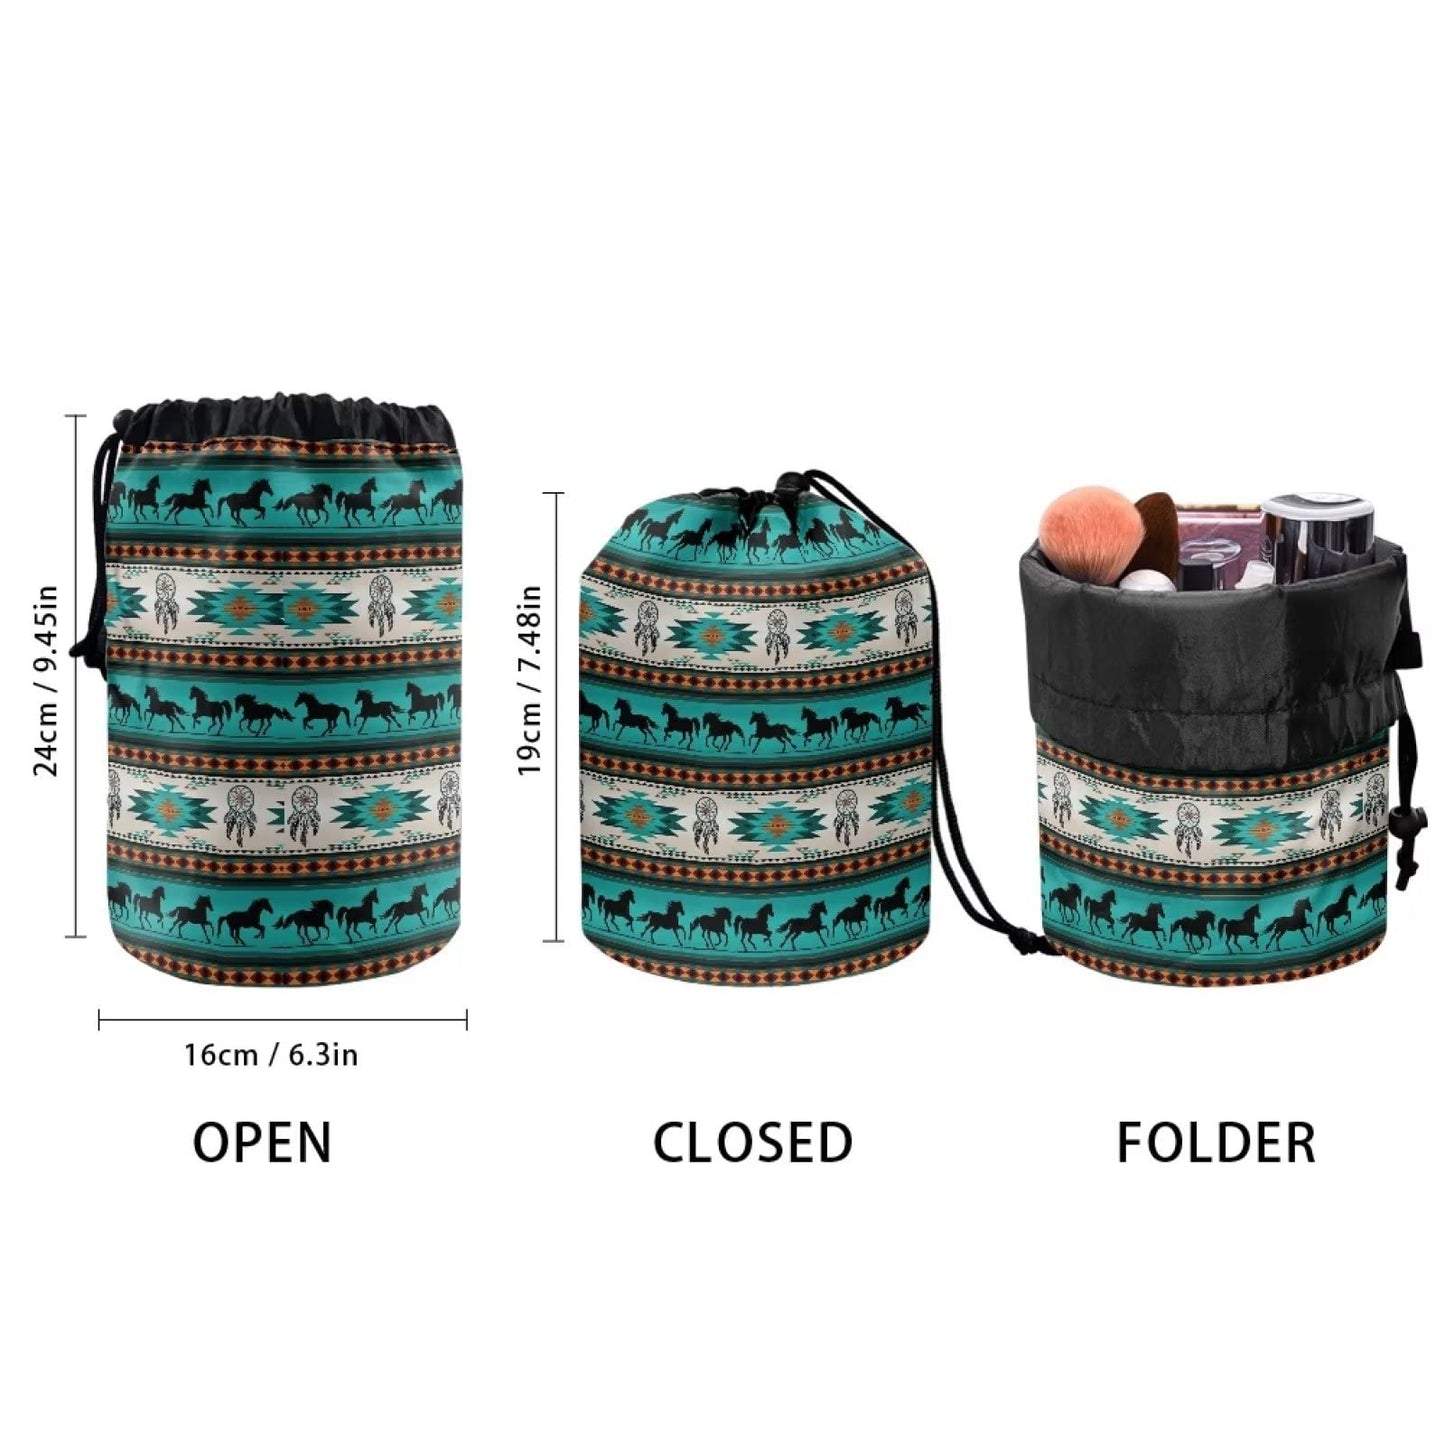 chaqlin Aztec Horse Drawstring Cosmetic Bag Women Girls Multifunctional Bucket Toiletry Bag for Travel Portable Cosmetics Wash Bag Bucket Toiletry Bag Dream Catcher Horse Print Make up Pouch, Aztec